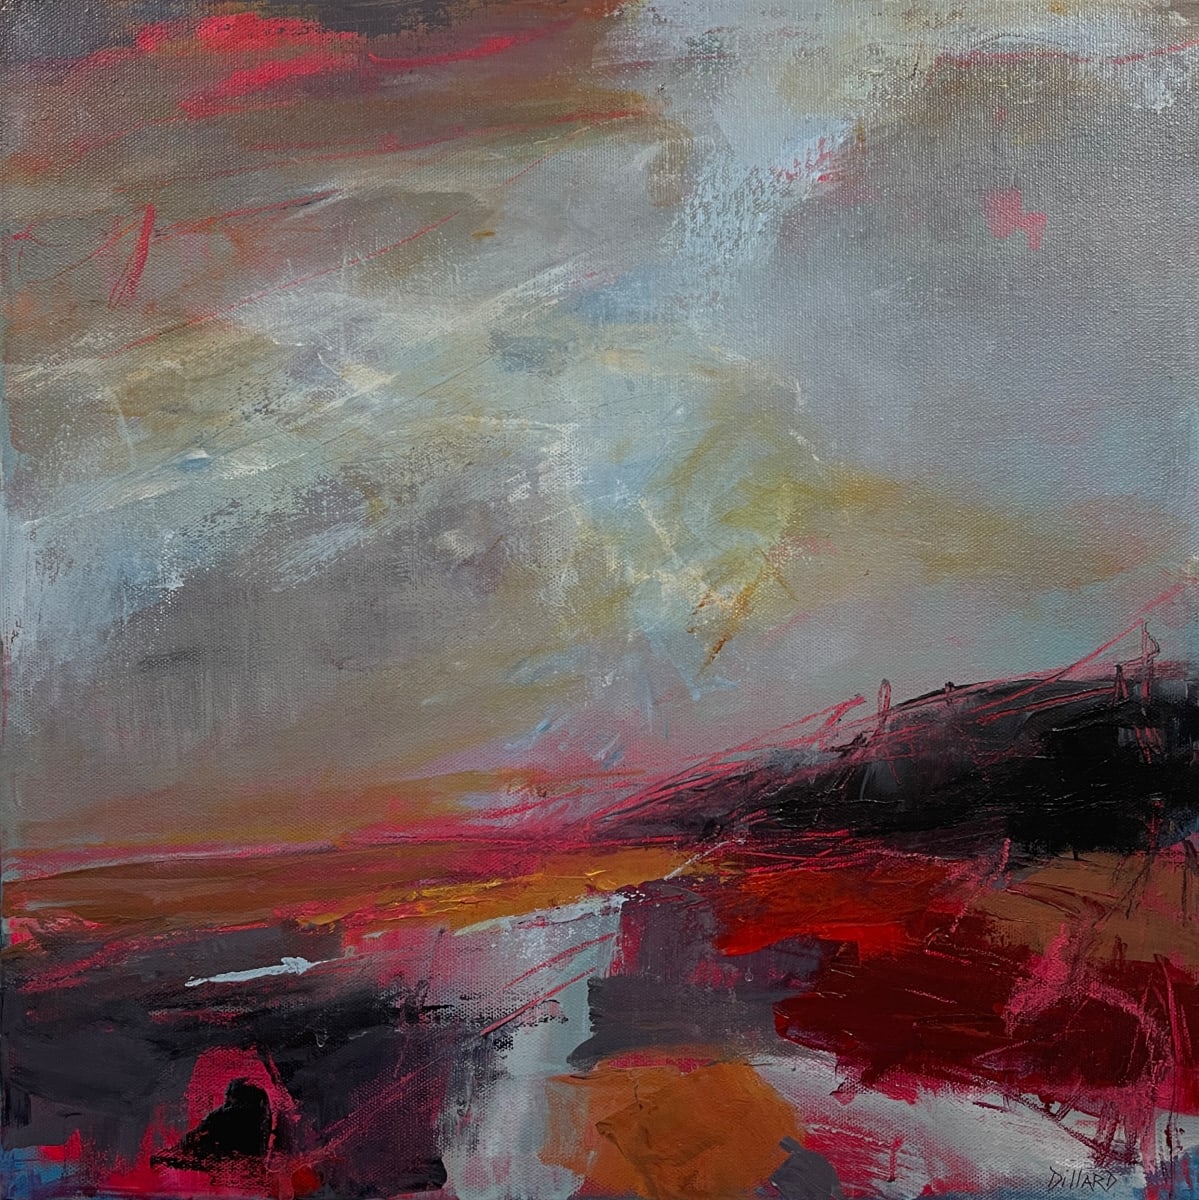 Fire in the Mountains by Kelly Dillard  Image: Expressions of a mountain and valley in vibrant pinks and muted greys.